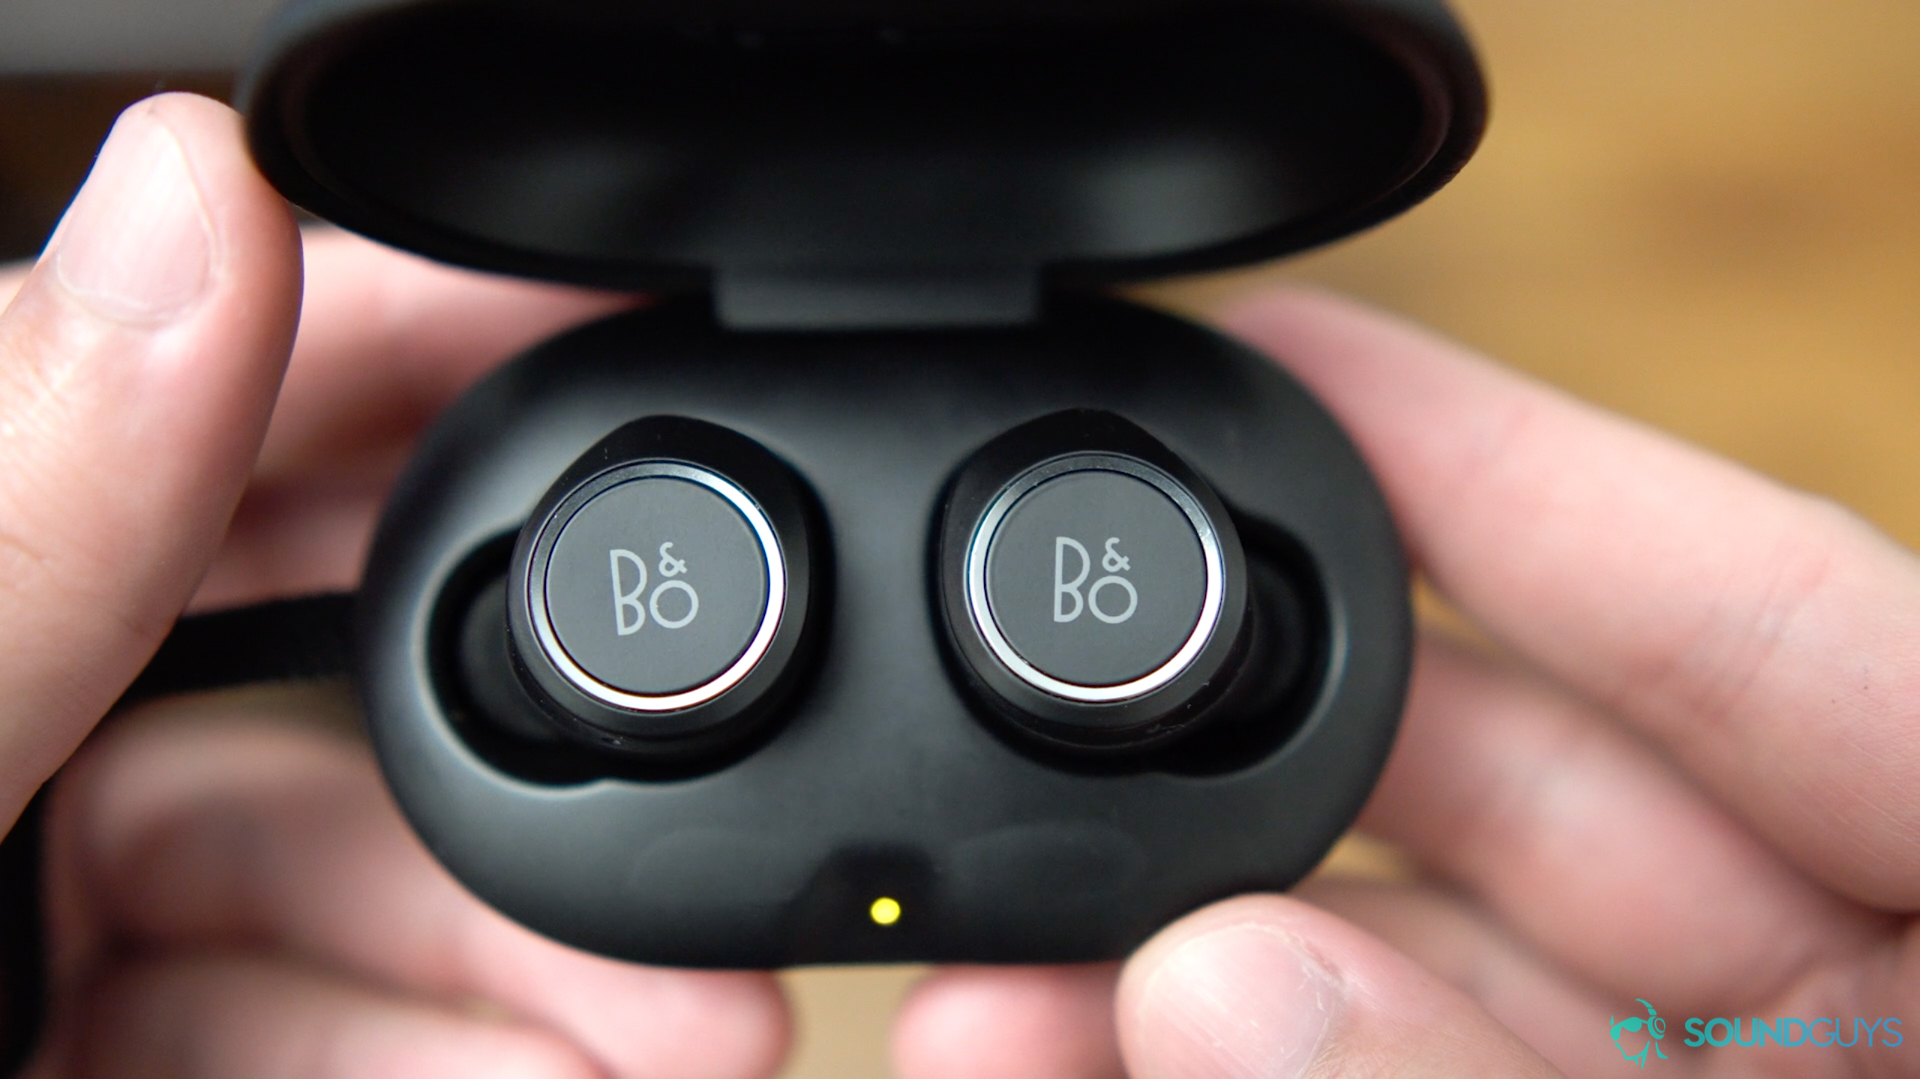 The charging case of the Beoplay E8 held open in hand so the earbuds are clearly visible.